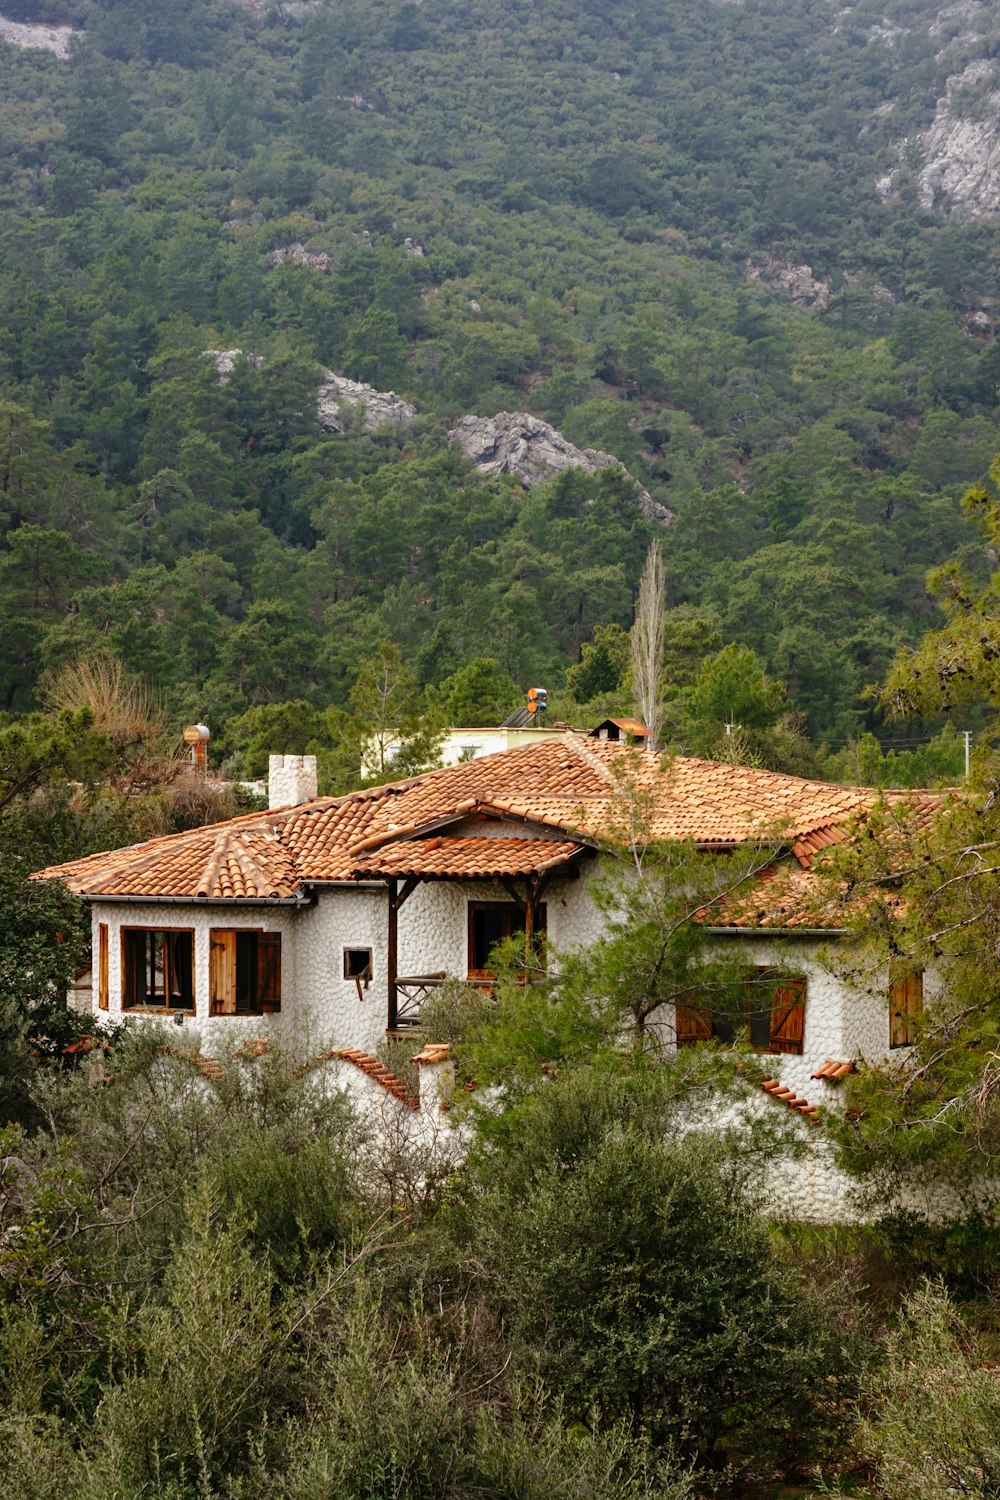 a house in the middle of a forest with mountains in the background